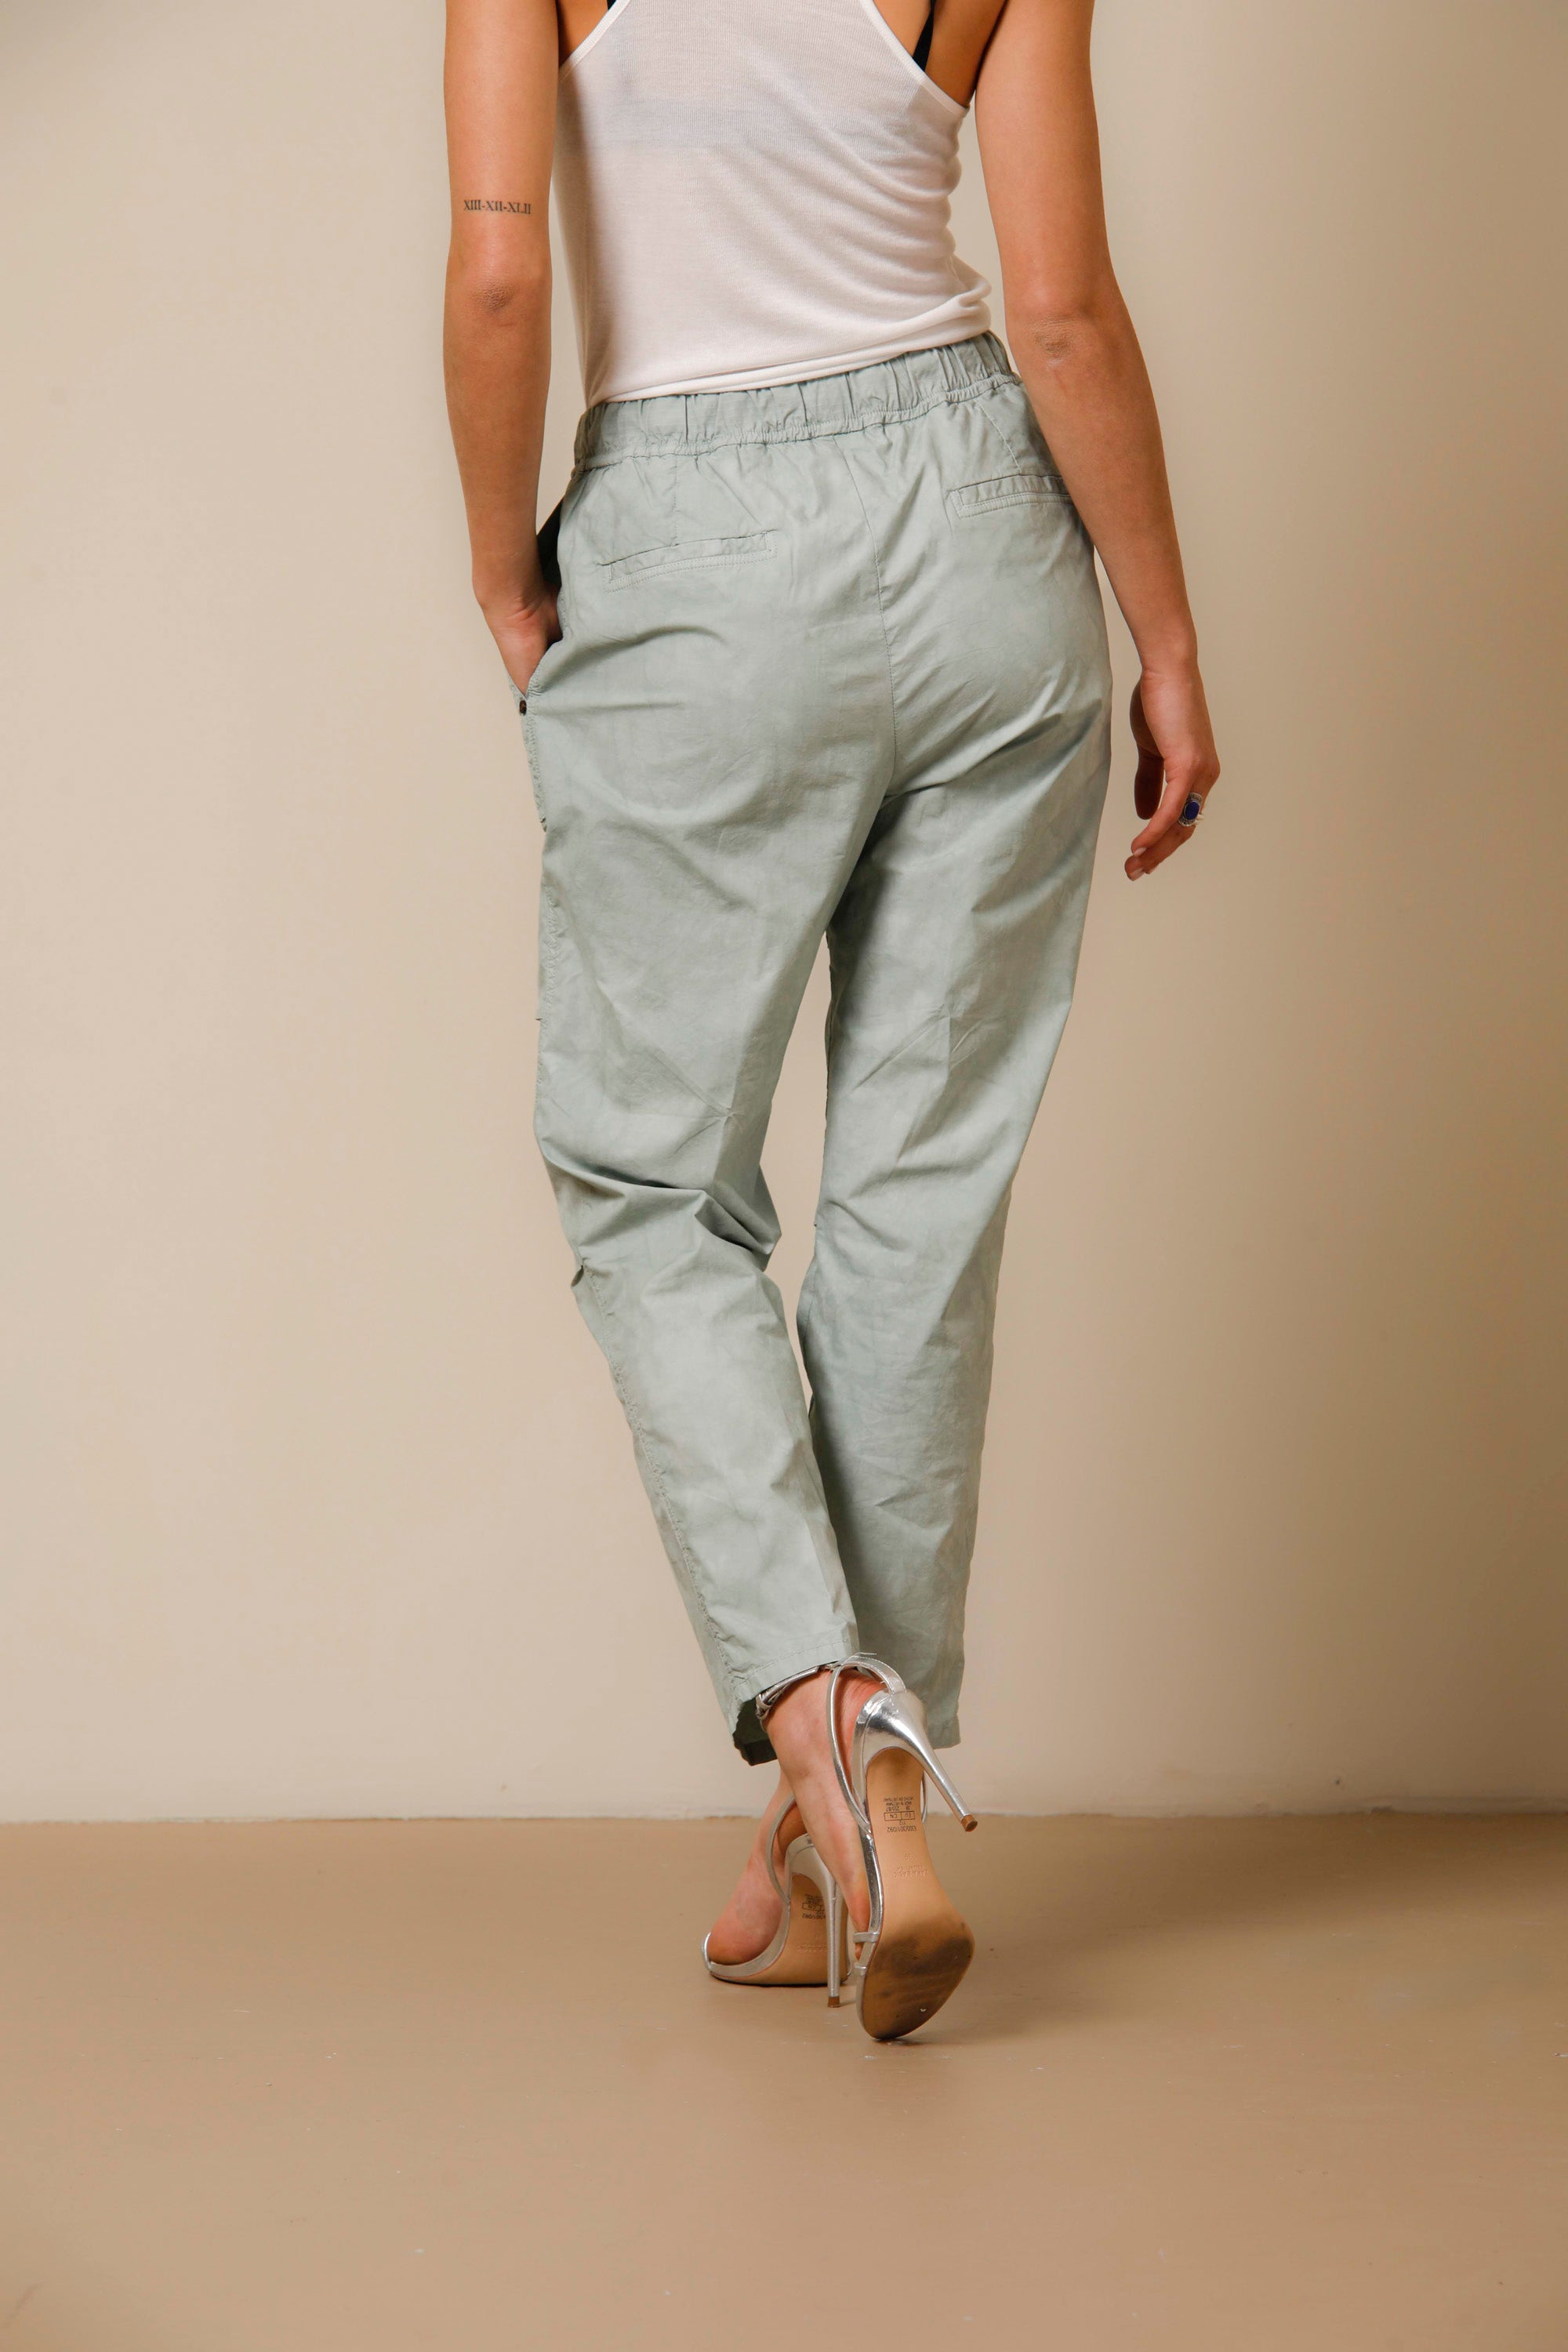 Fatigue Jogger pantalone chino donna in tela paracadute icon washes relaxed